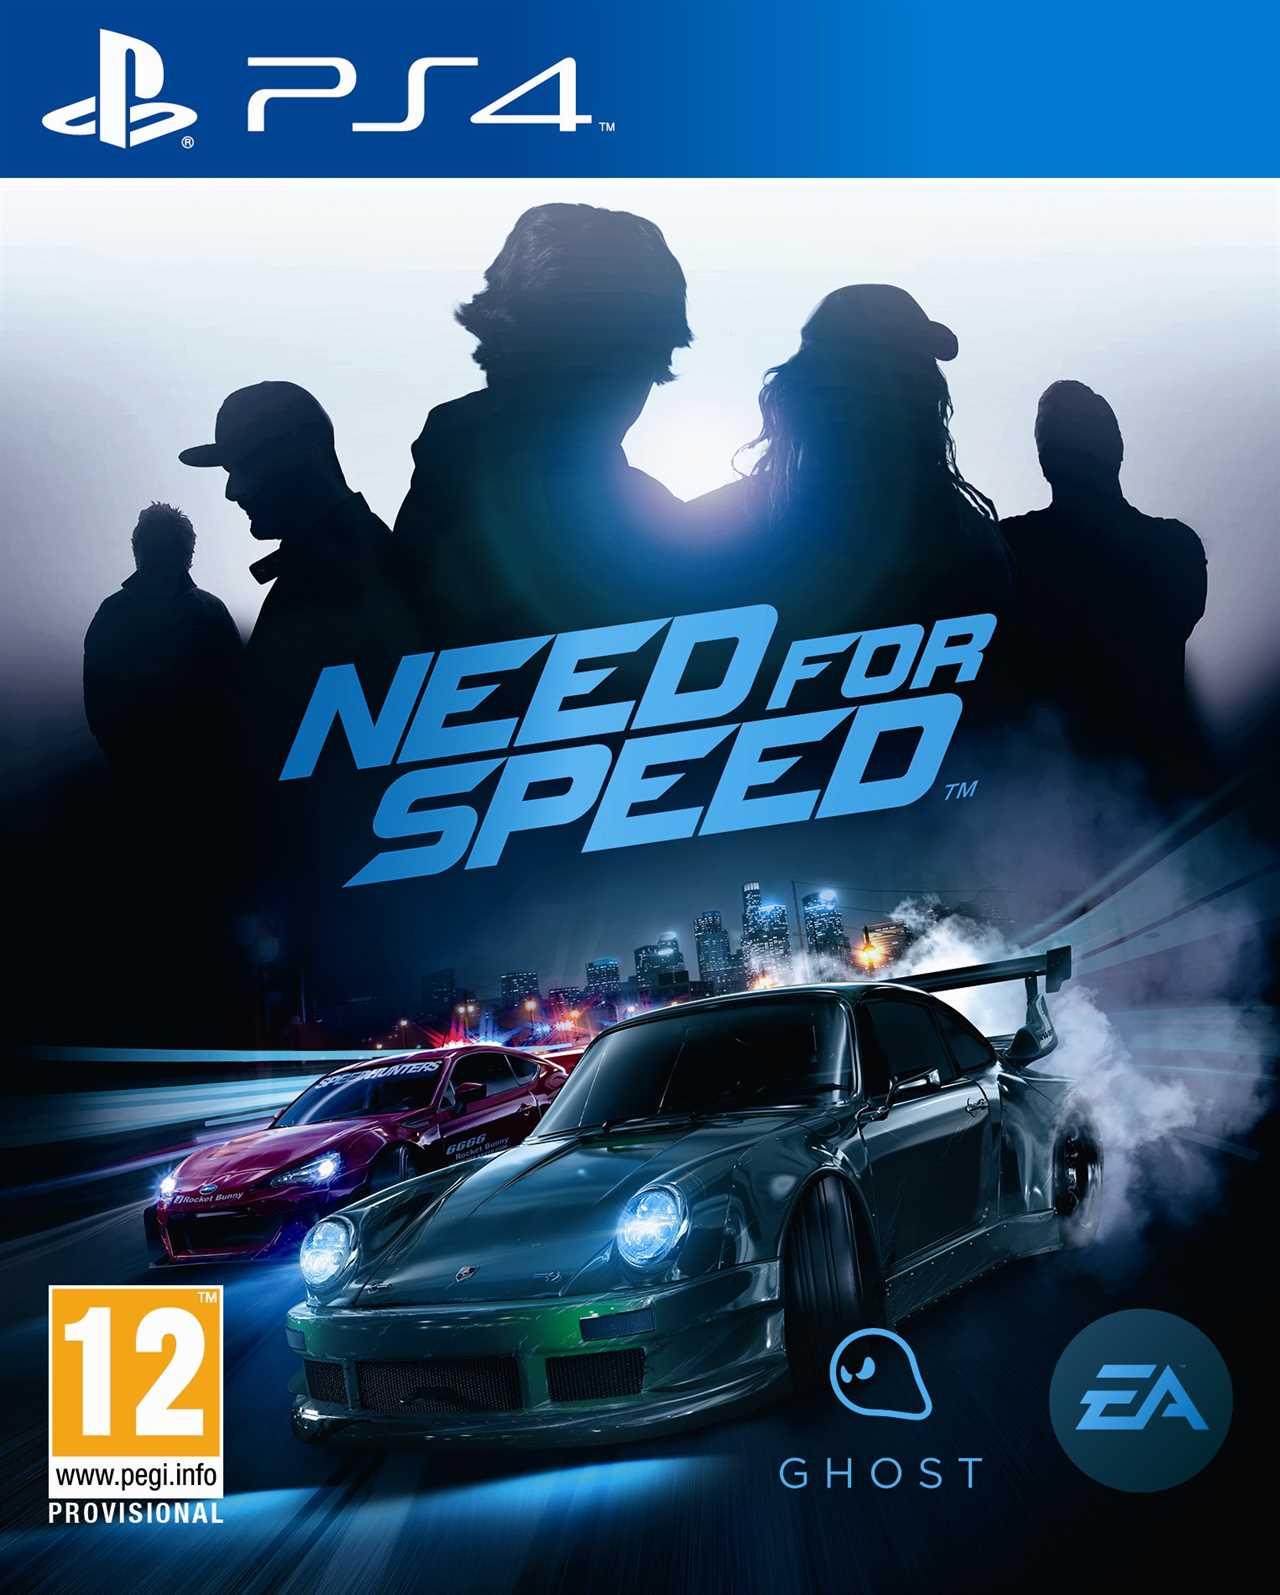 Need For Speed games in order: By release date